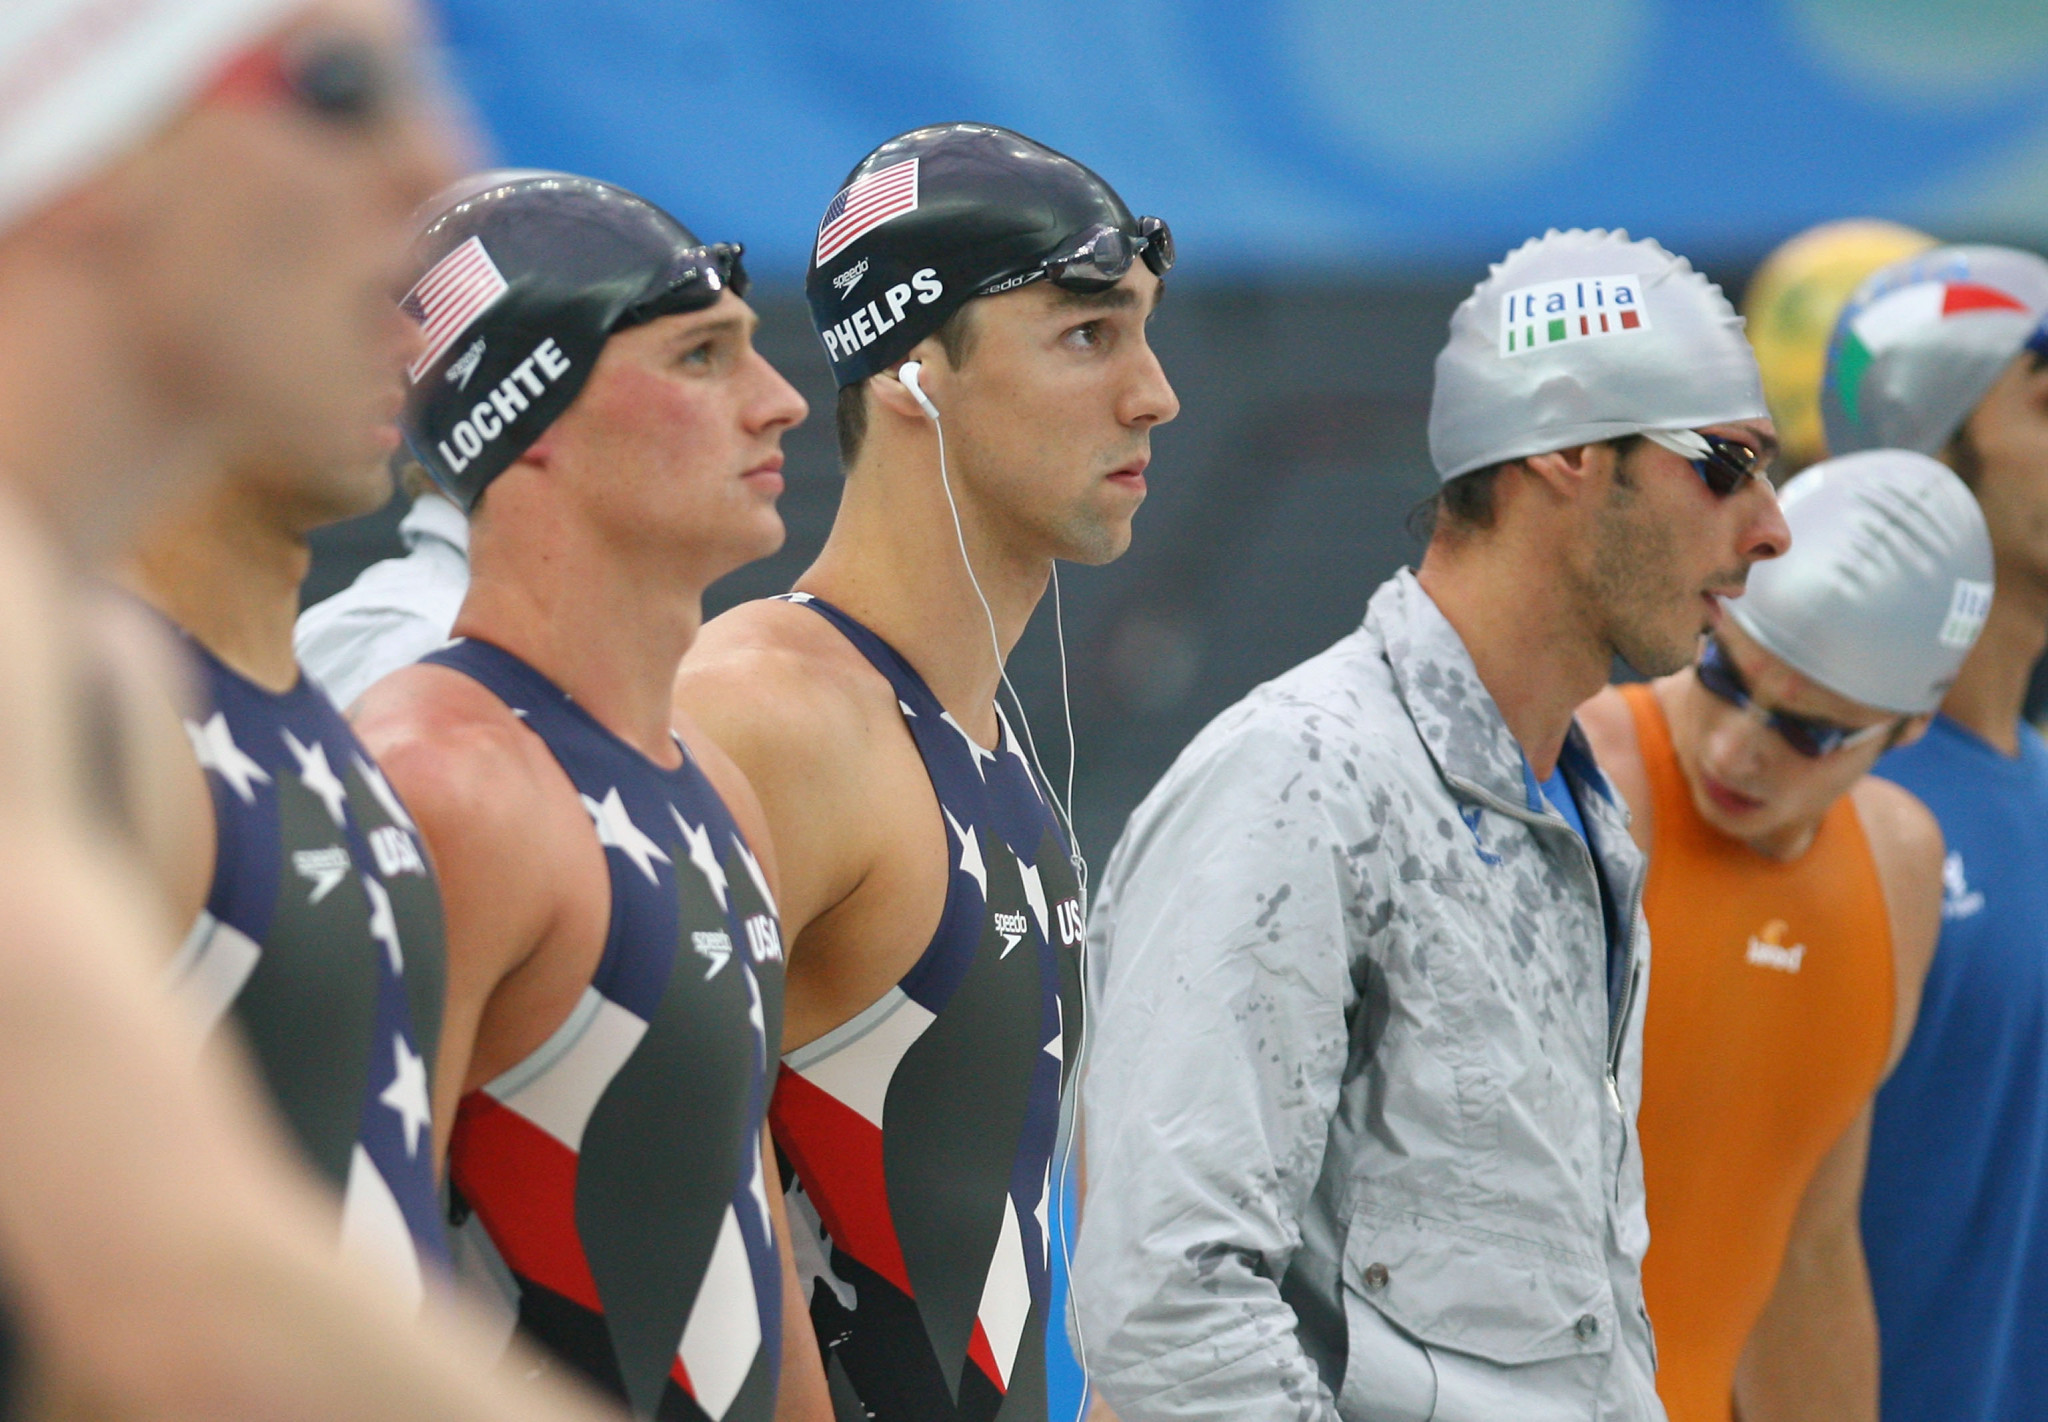 Michael Phelps was the poster boy for the full body Speedo swimsuits widely used at the Beijing 2008 Olympics, which were banned by the International Swimming Federation in 2010 ©Getty Images